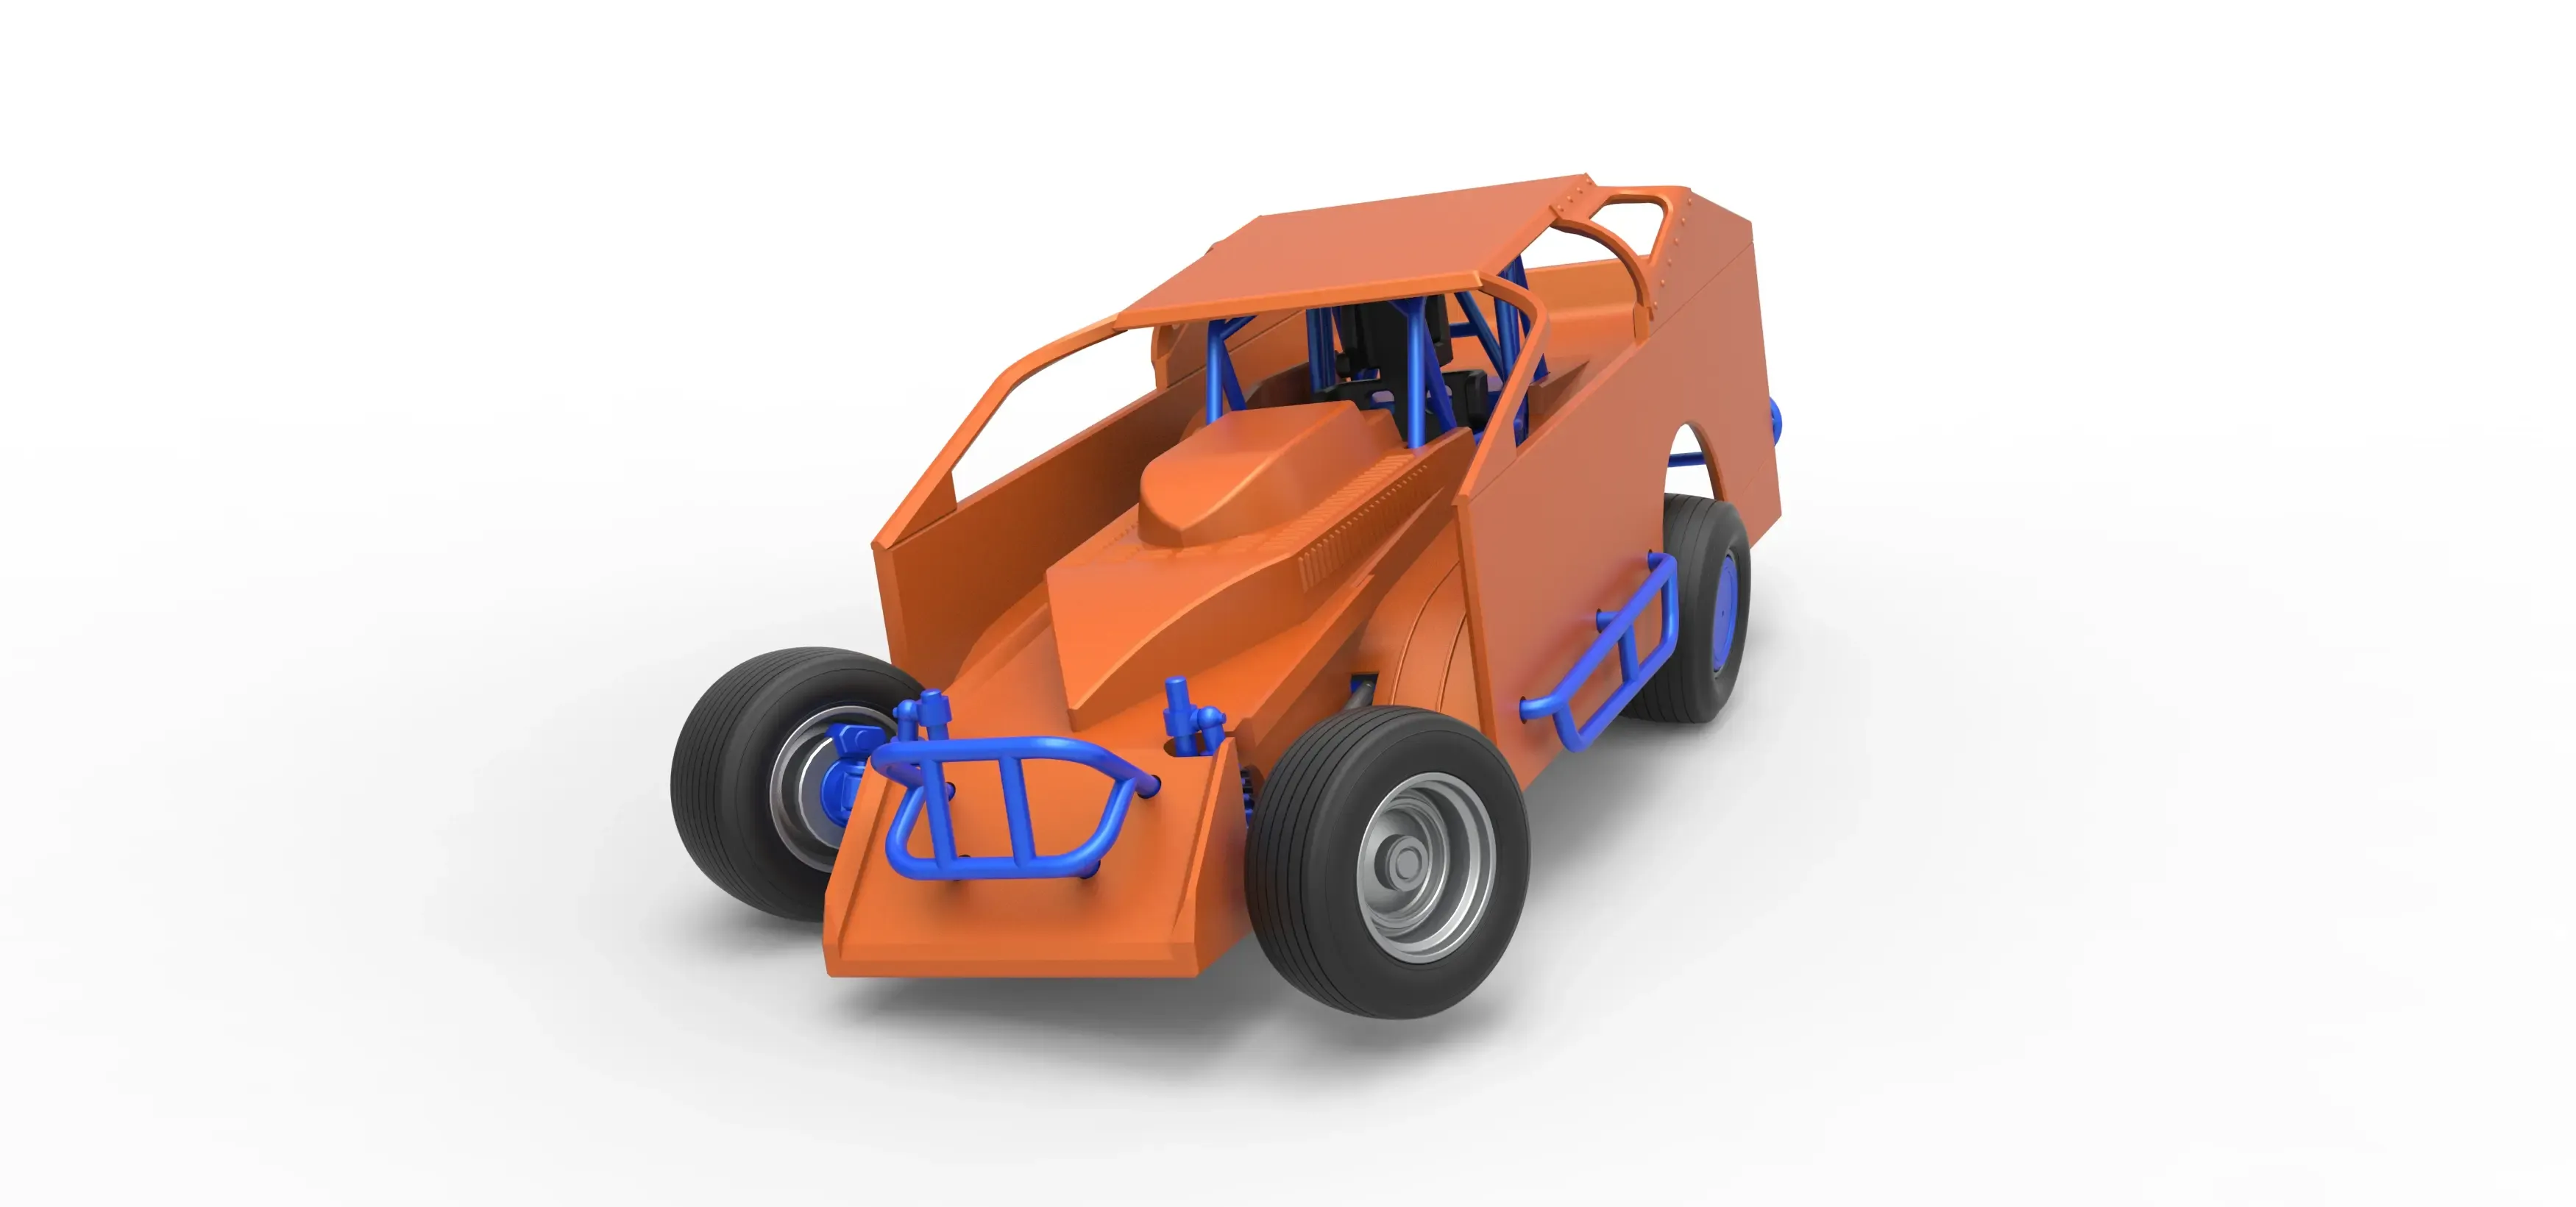 Northeast Dirt Modified stock car while turning Scale 1:25